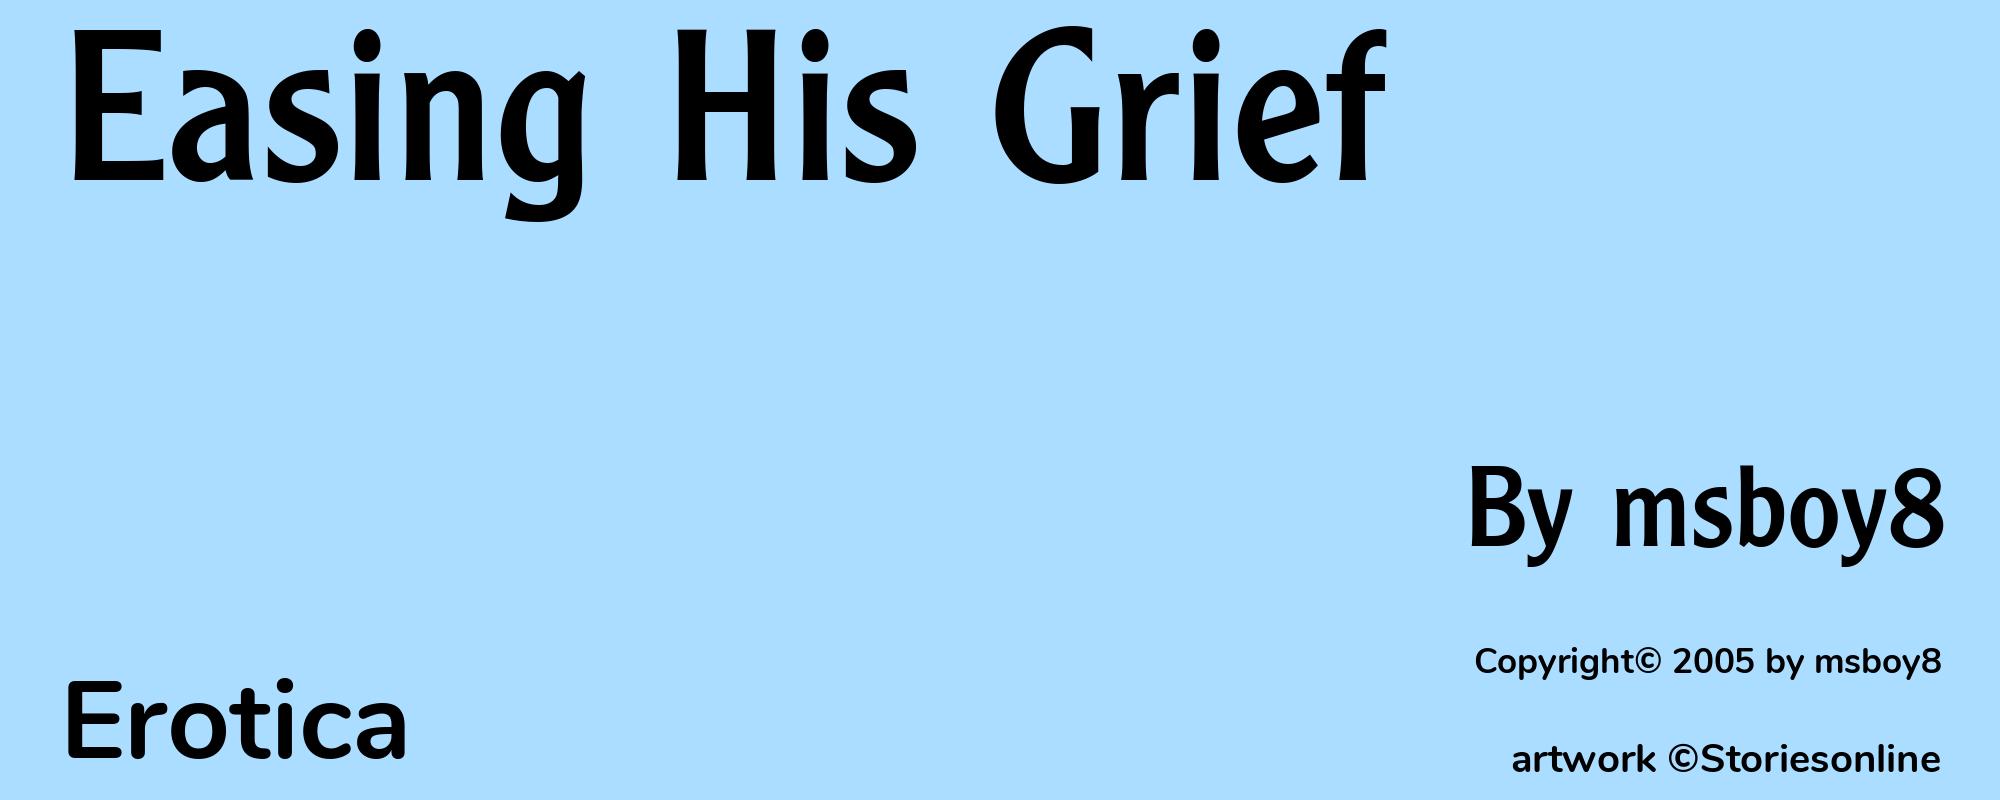 Easing His Grief - Cover